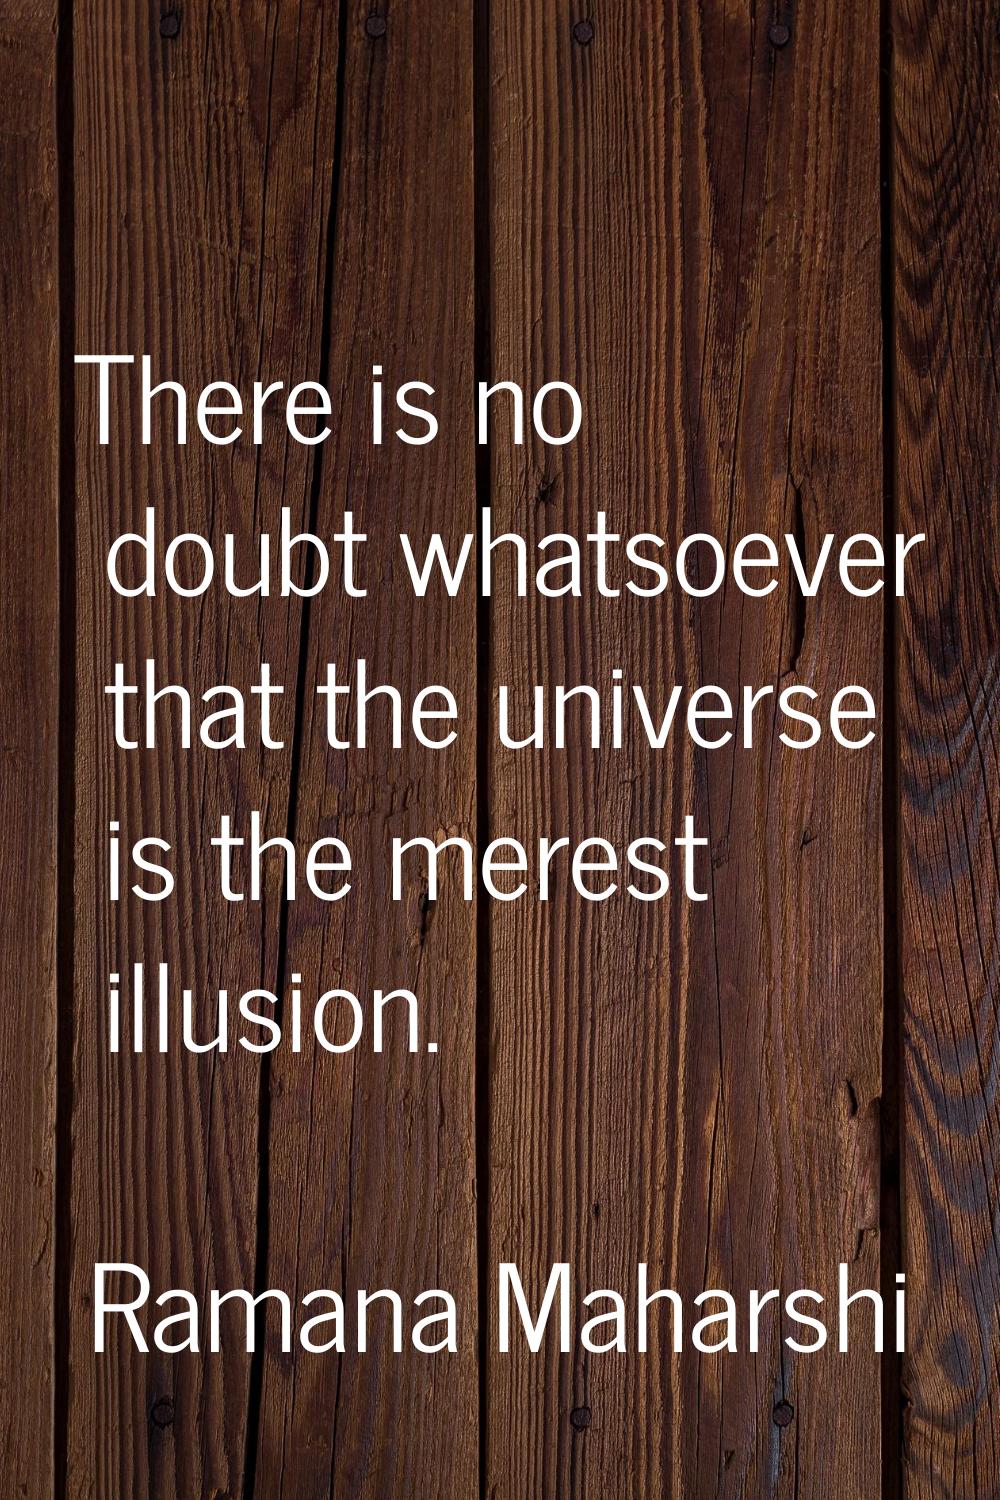 There is no doubt whatsoever that the universe is the merest illusion.